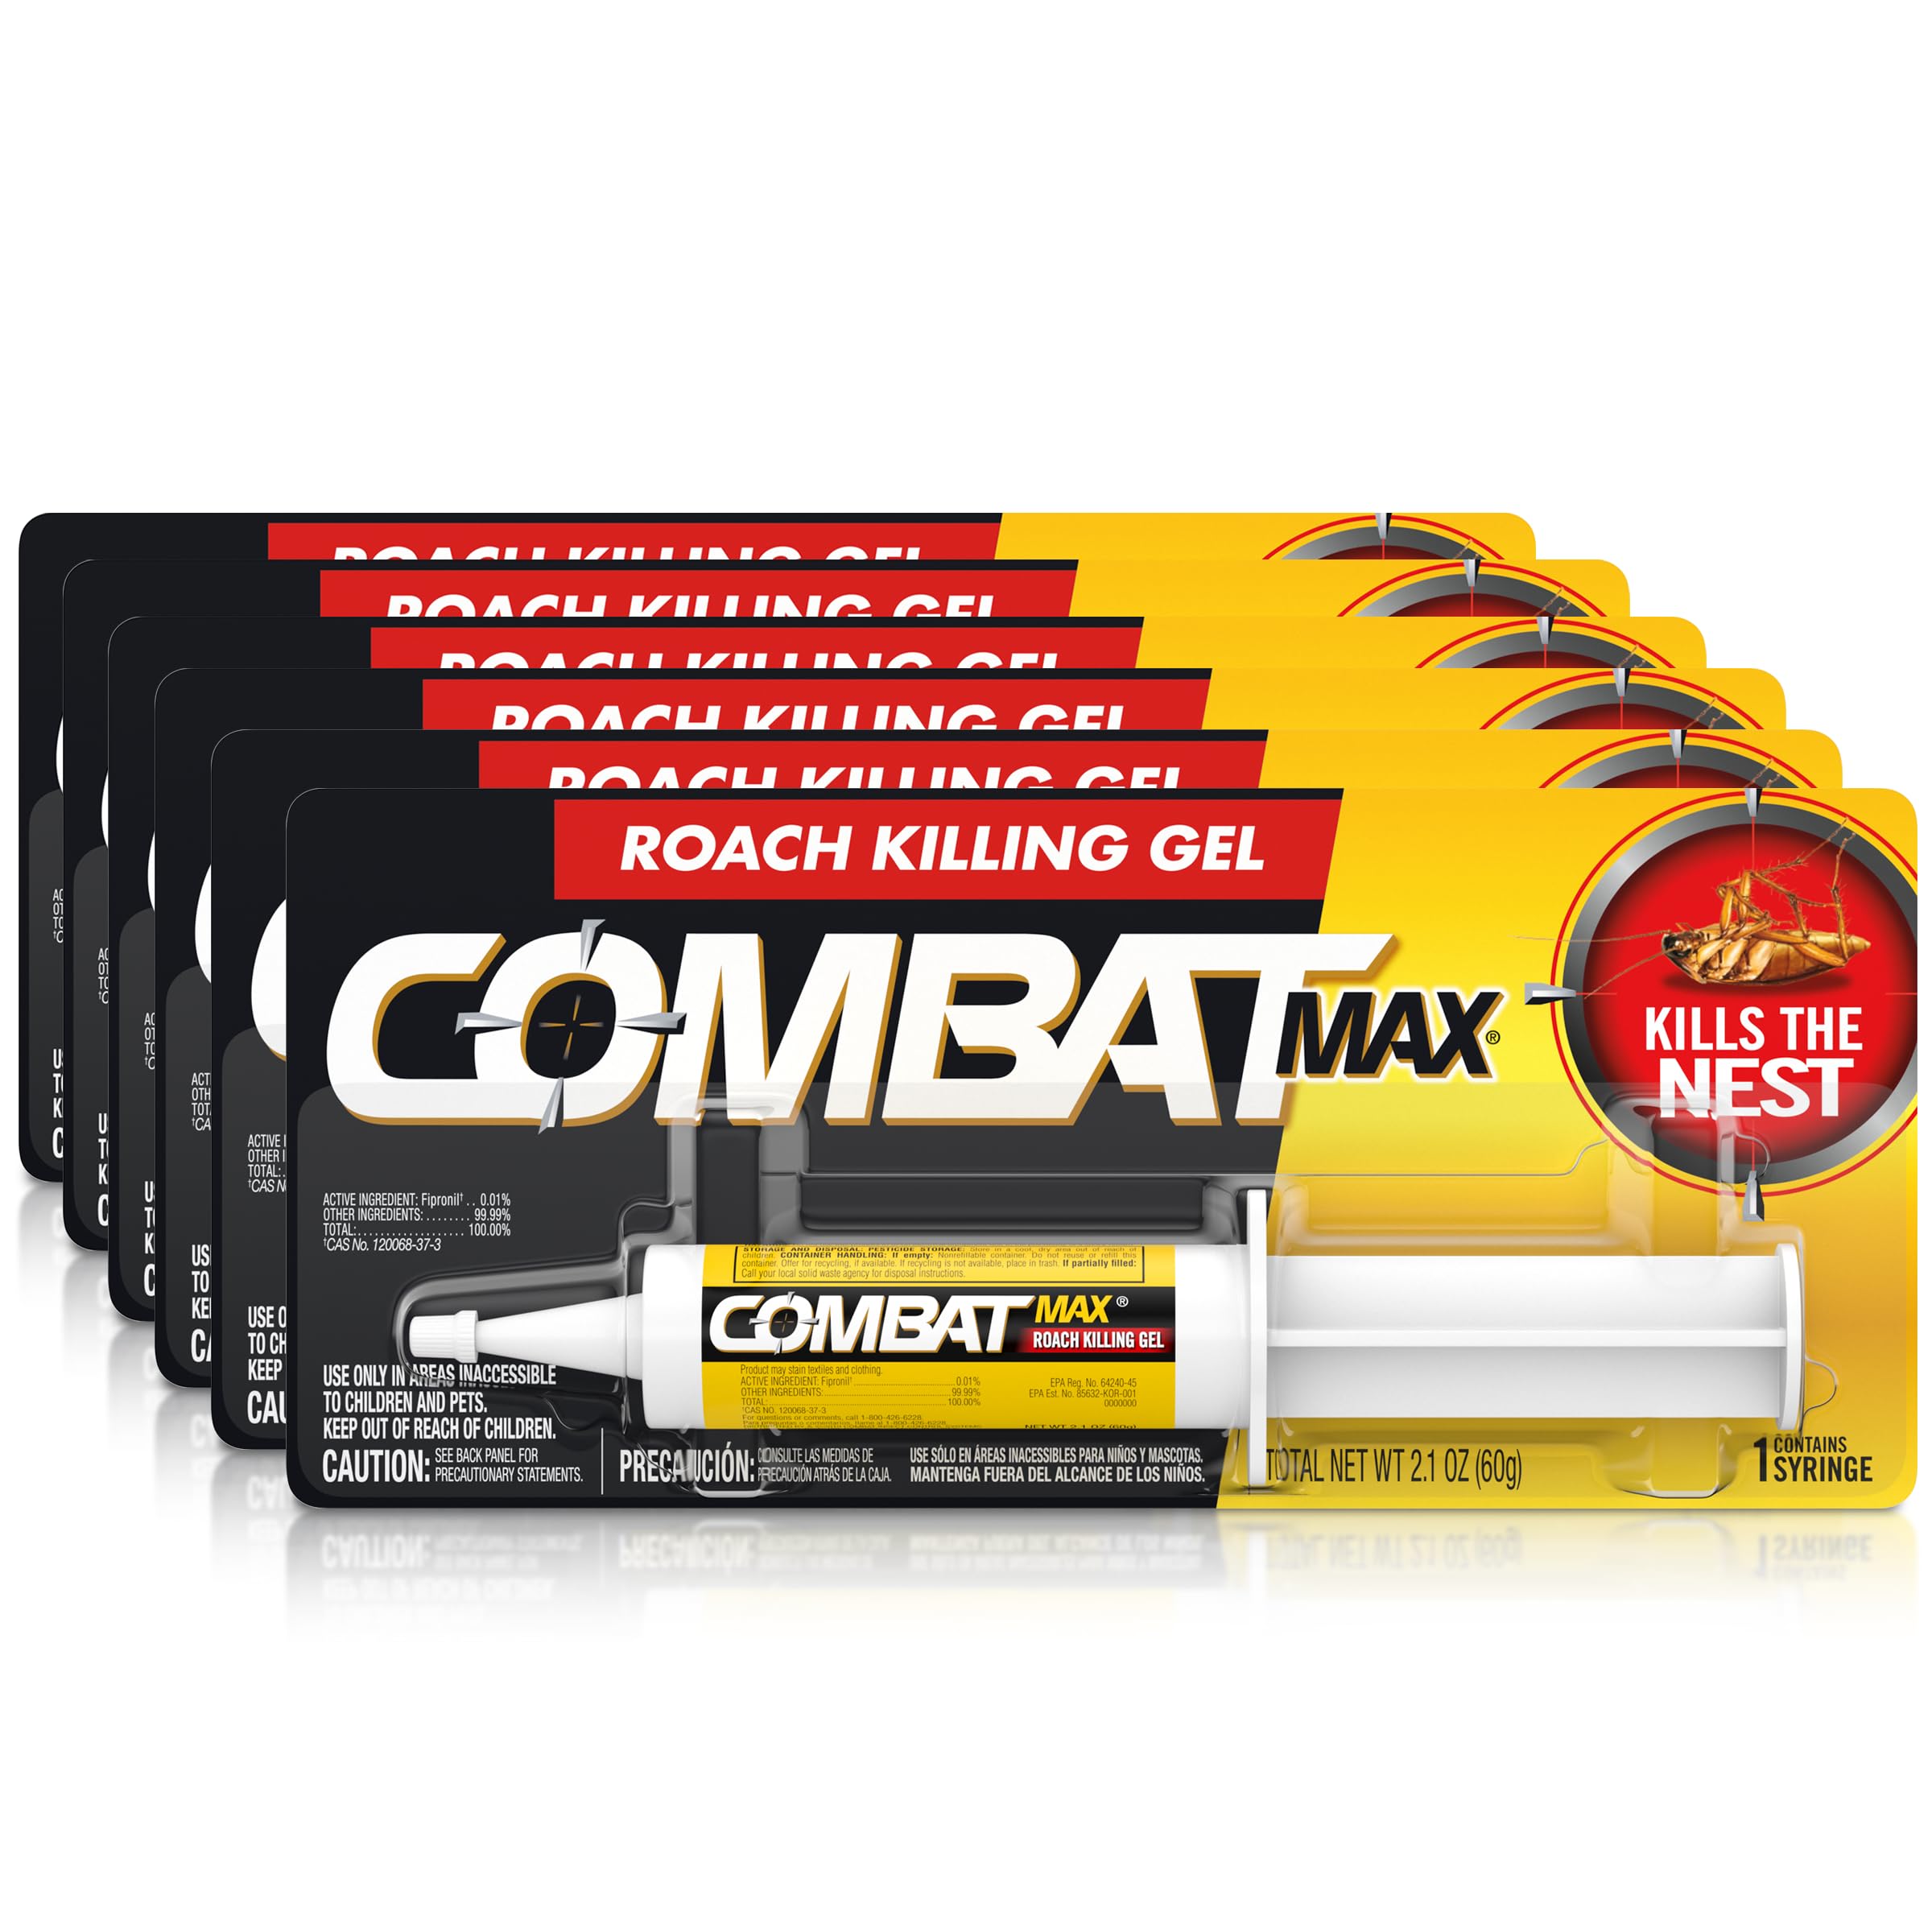 Combat Max Roach Killing Gel for Indoor and Outdoor Use, 1 Syringe, 2.1 Ounces (Pack of 6)